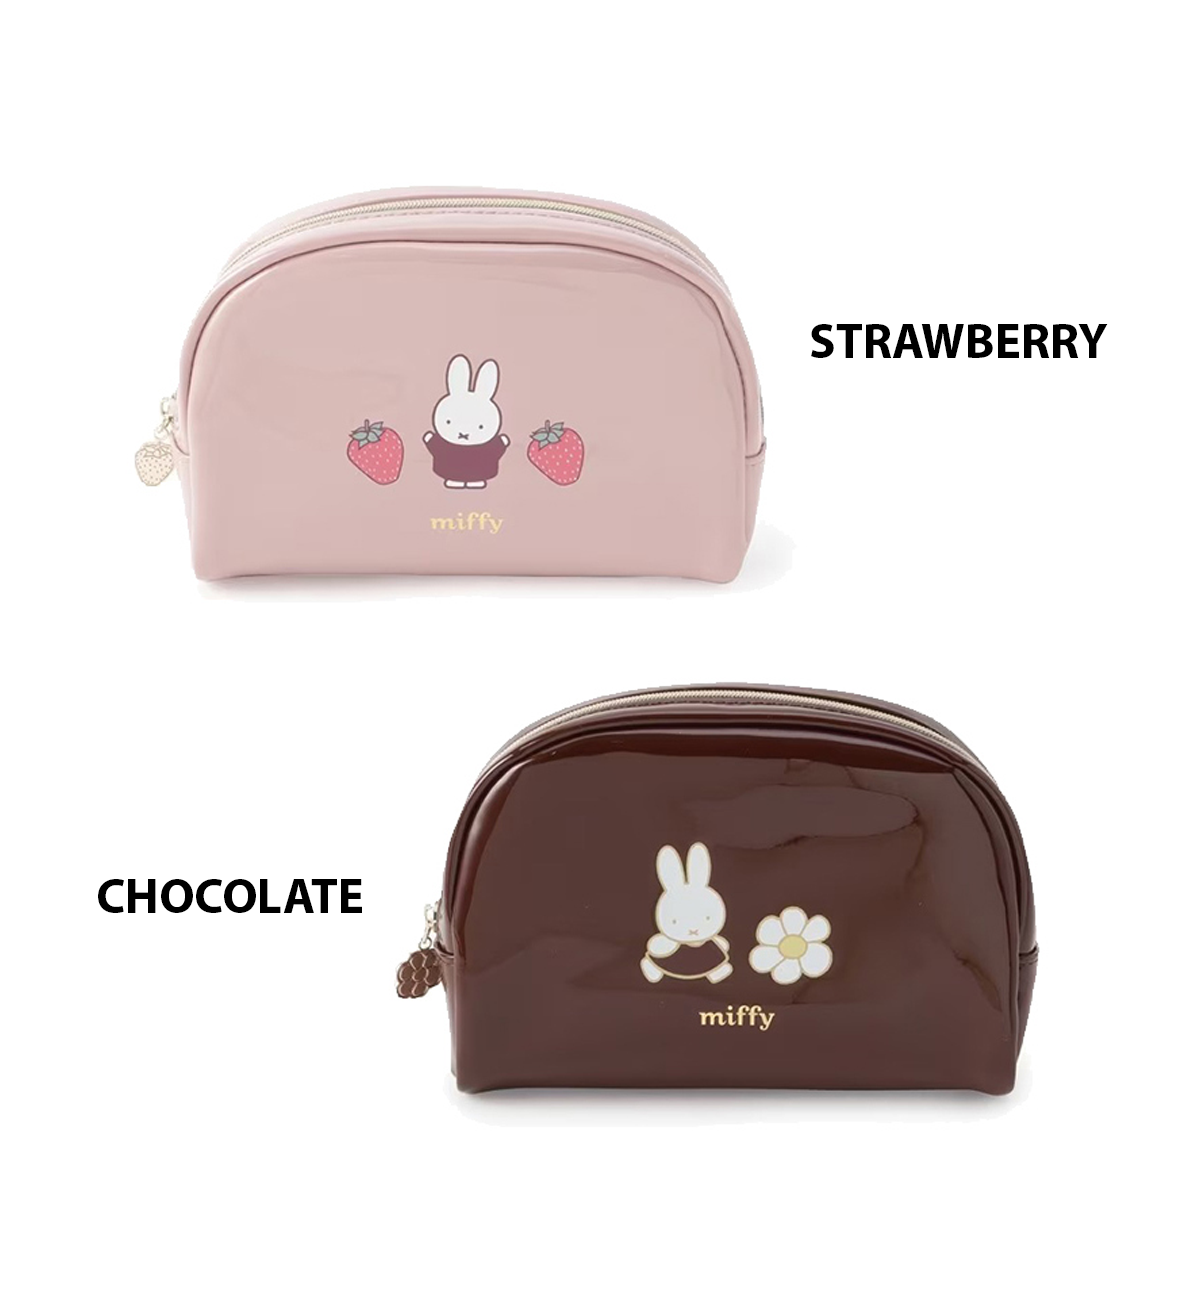 Miffy Strawberry & Chocolate Pouch